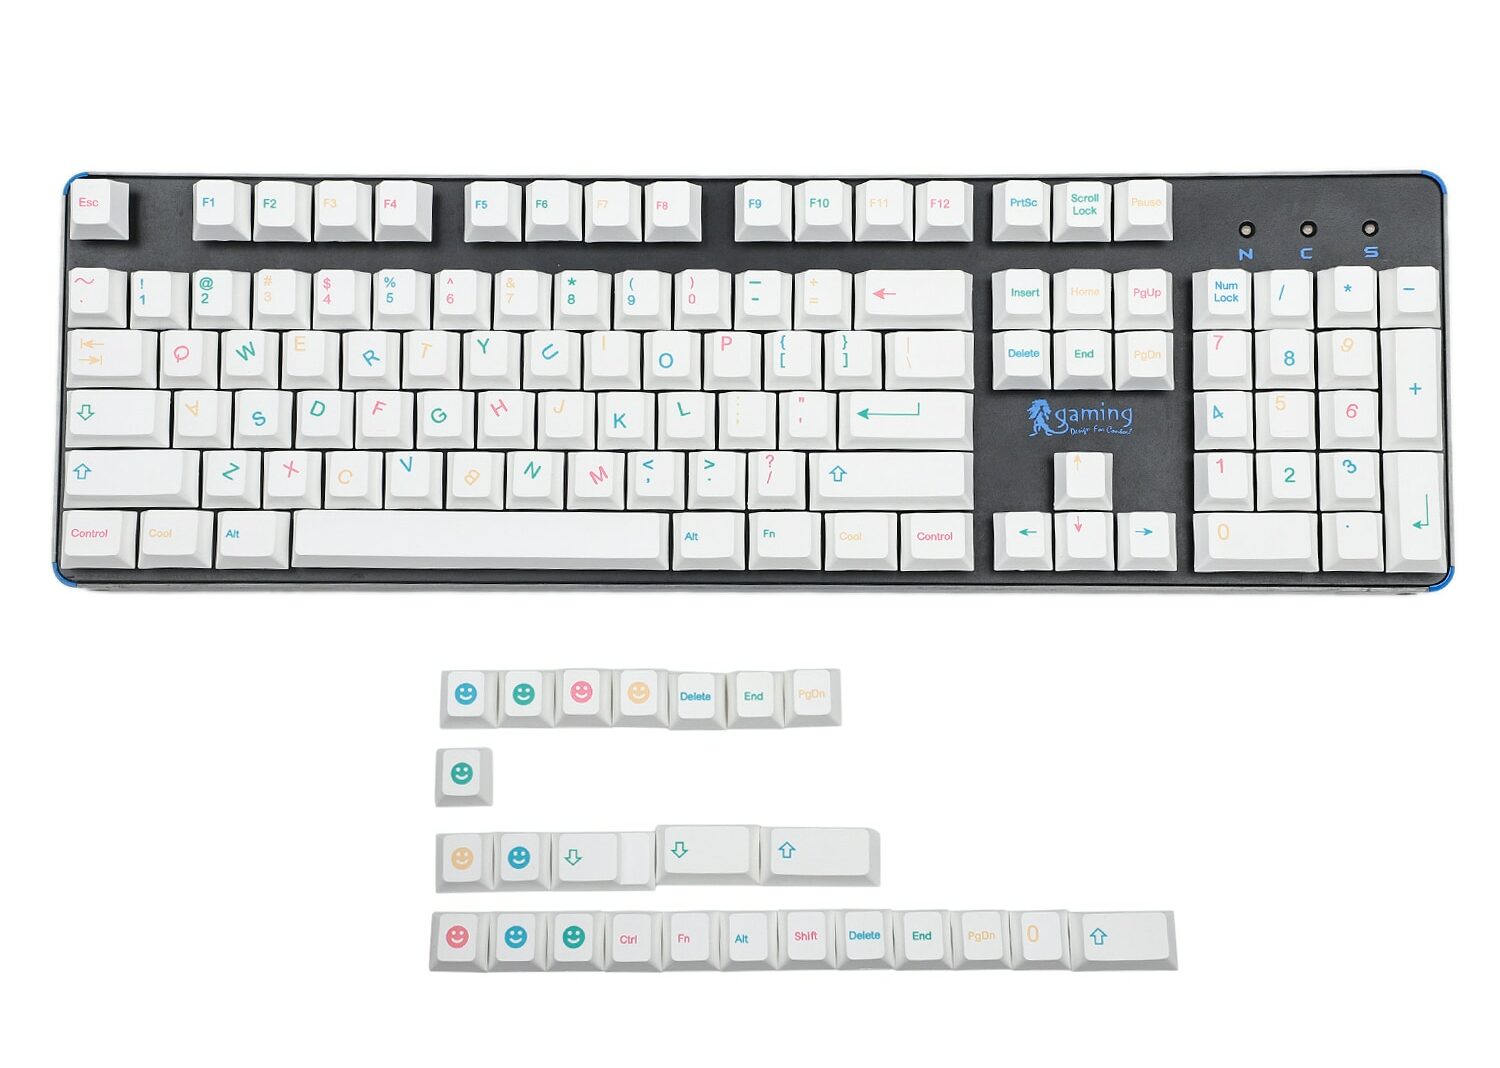 Colorful-white-Coolkid-Naughty-PBT-keycaps-set